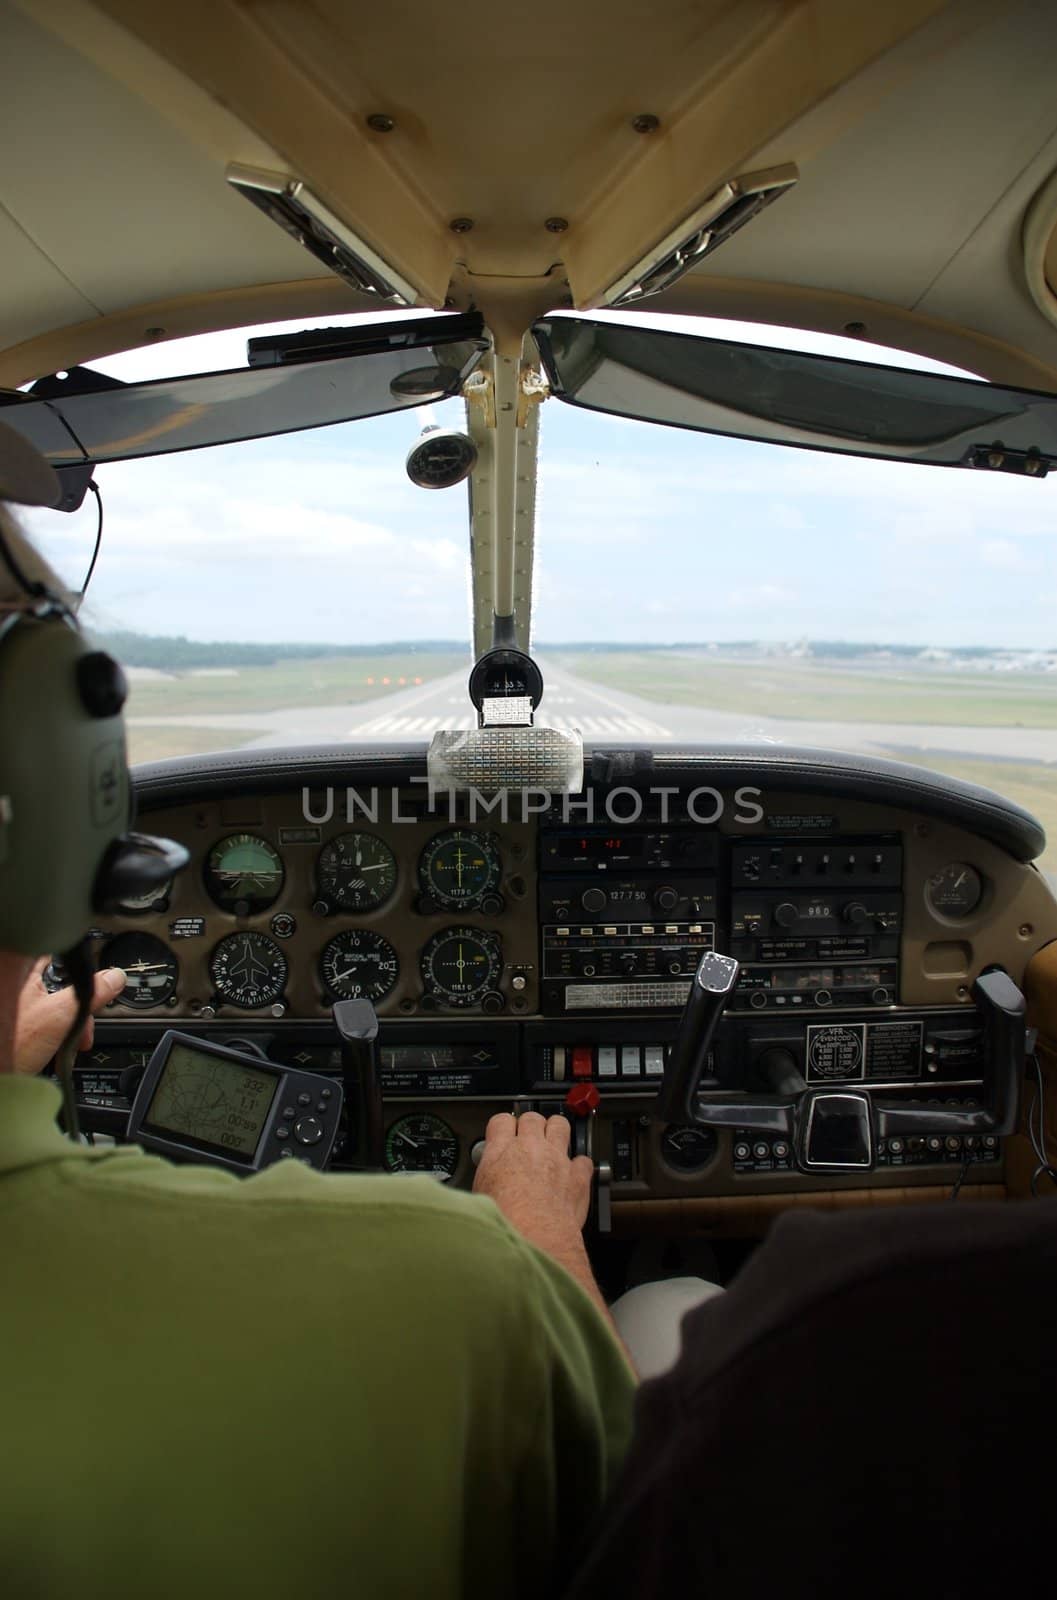 Small Aircraft (Airplane) Cockpit by Schvoo